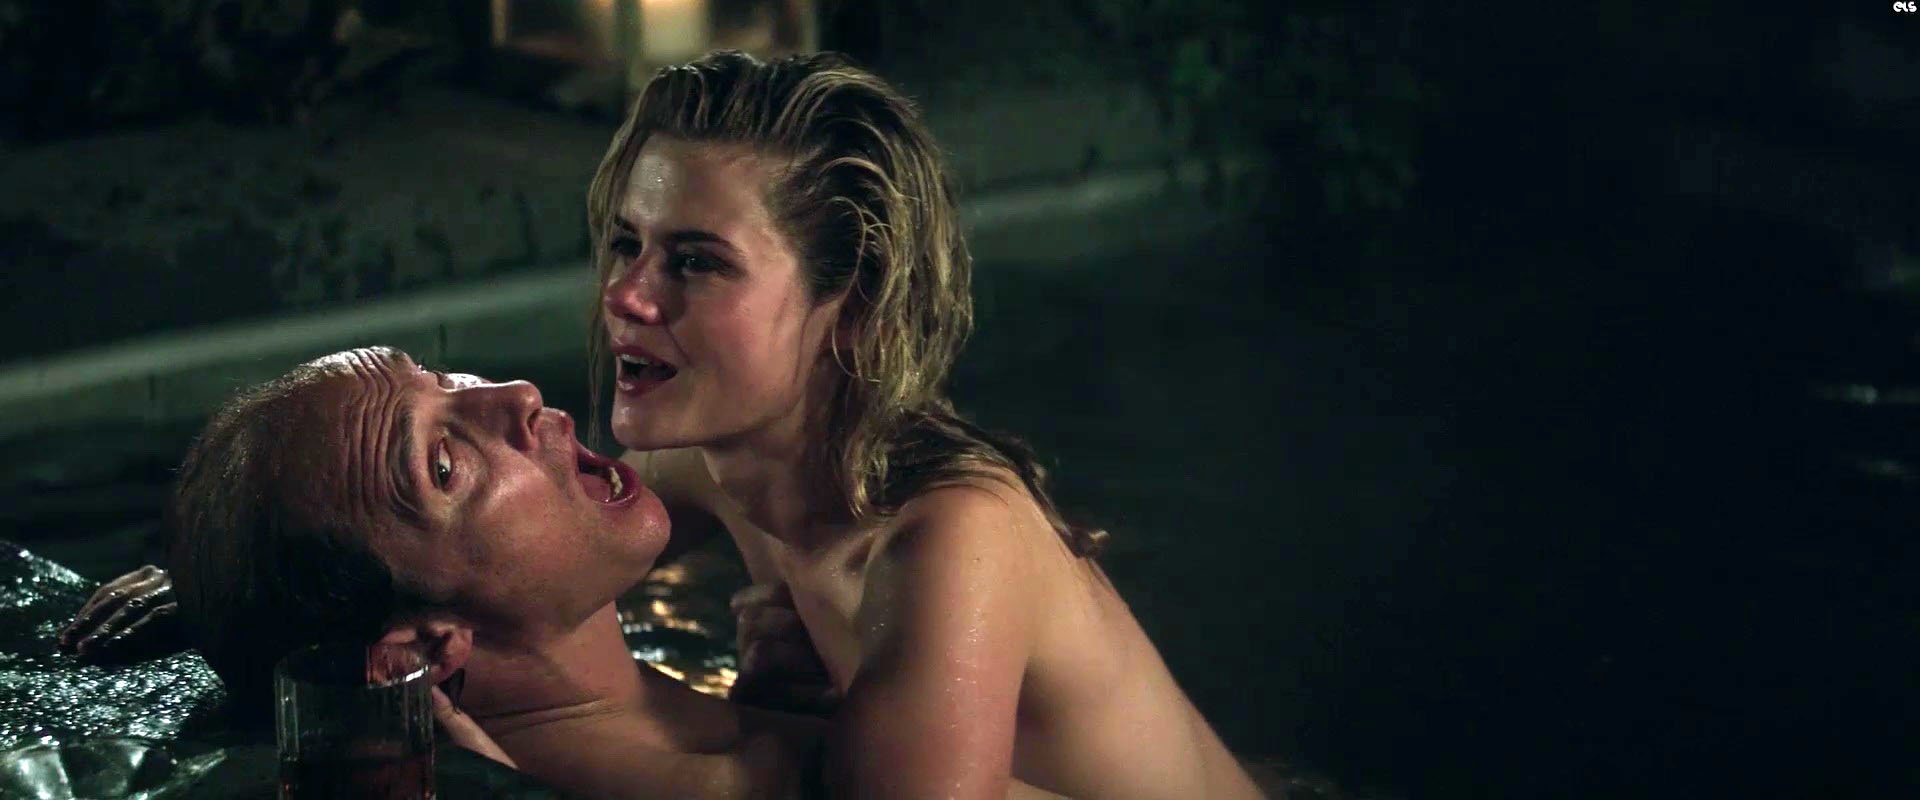 Nude video celebs » Rachael Taylor sexy - Gold (2016)